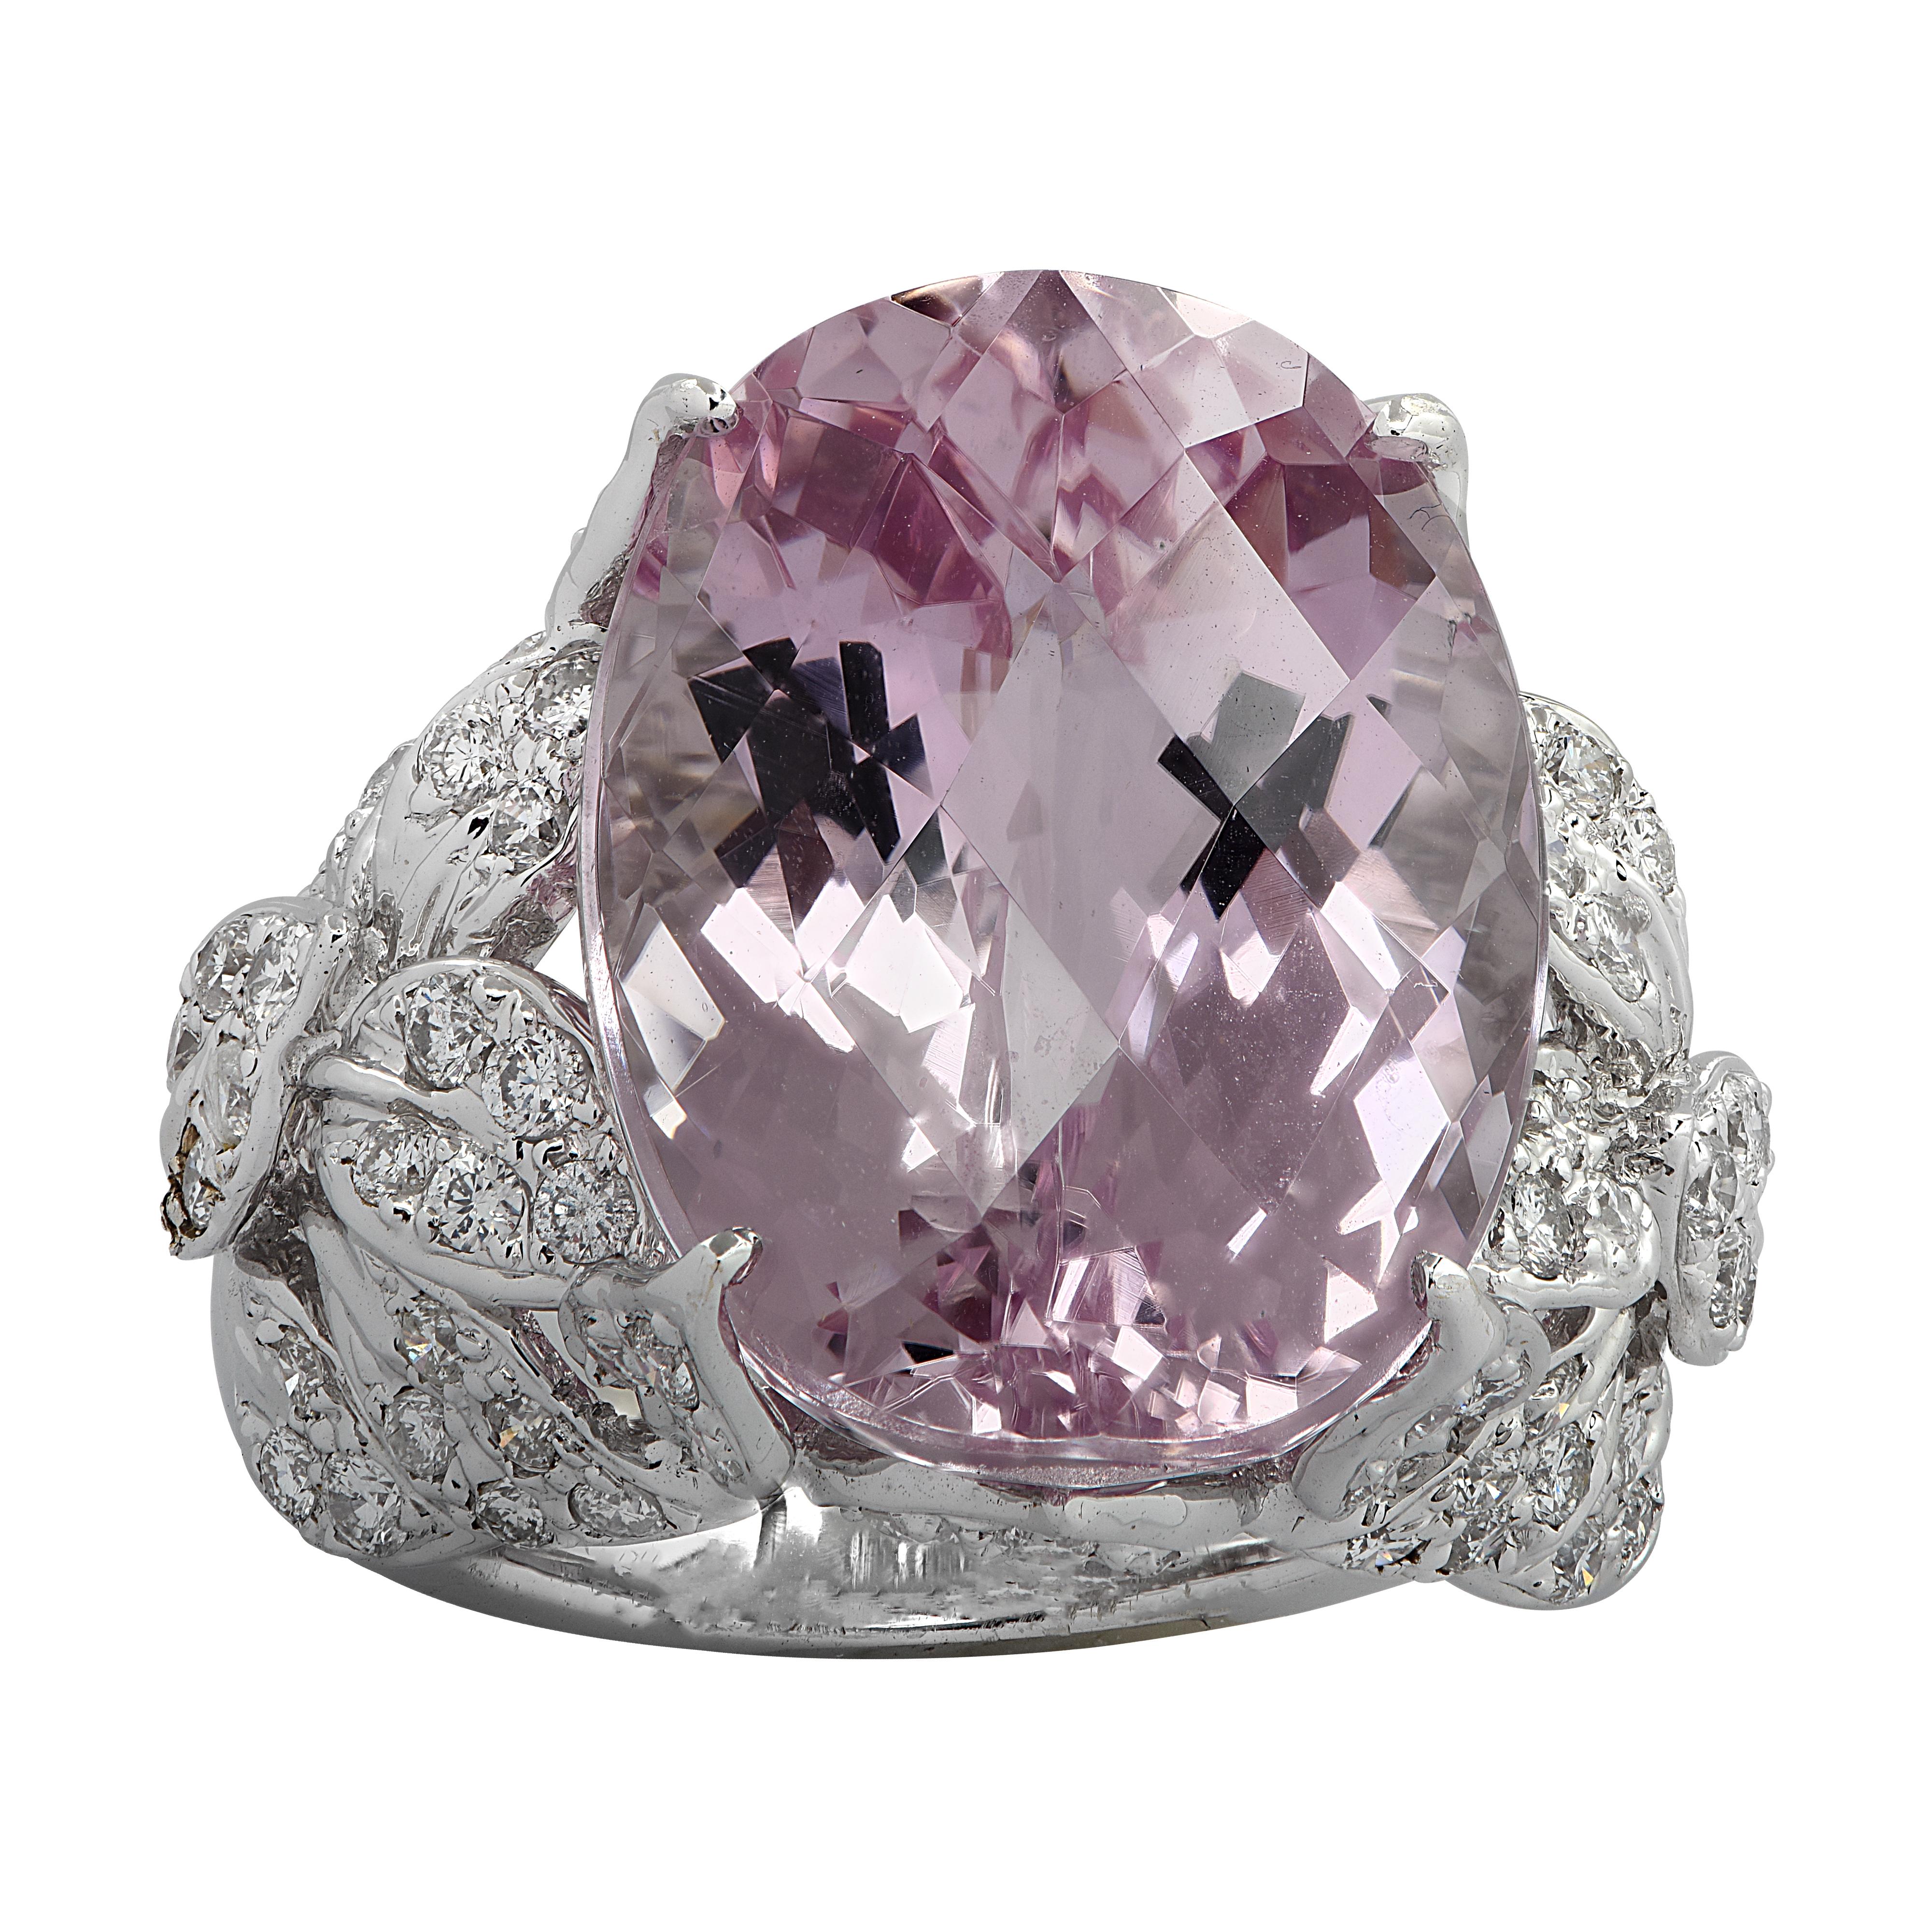 Oval Cut 19.22 Carat Pink Kunzite and Diamond Cocktail Ring